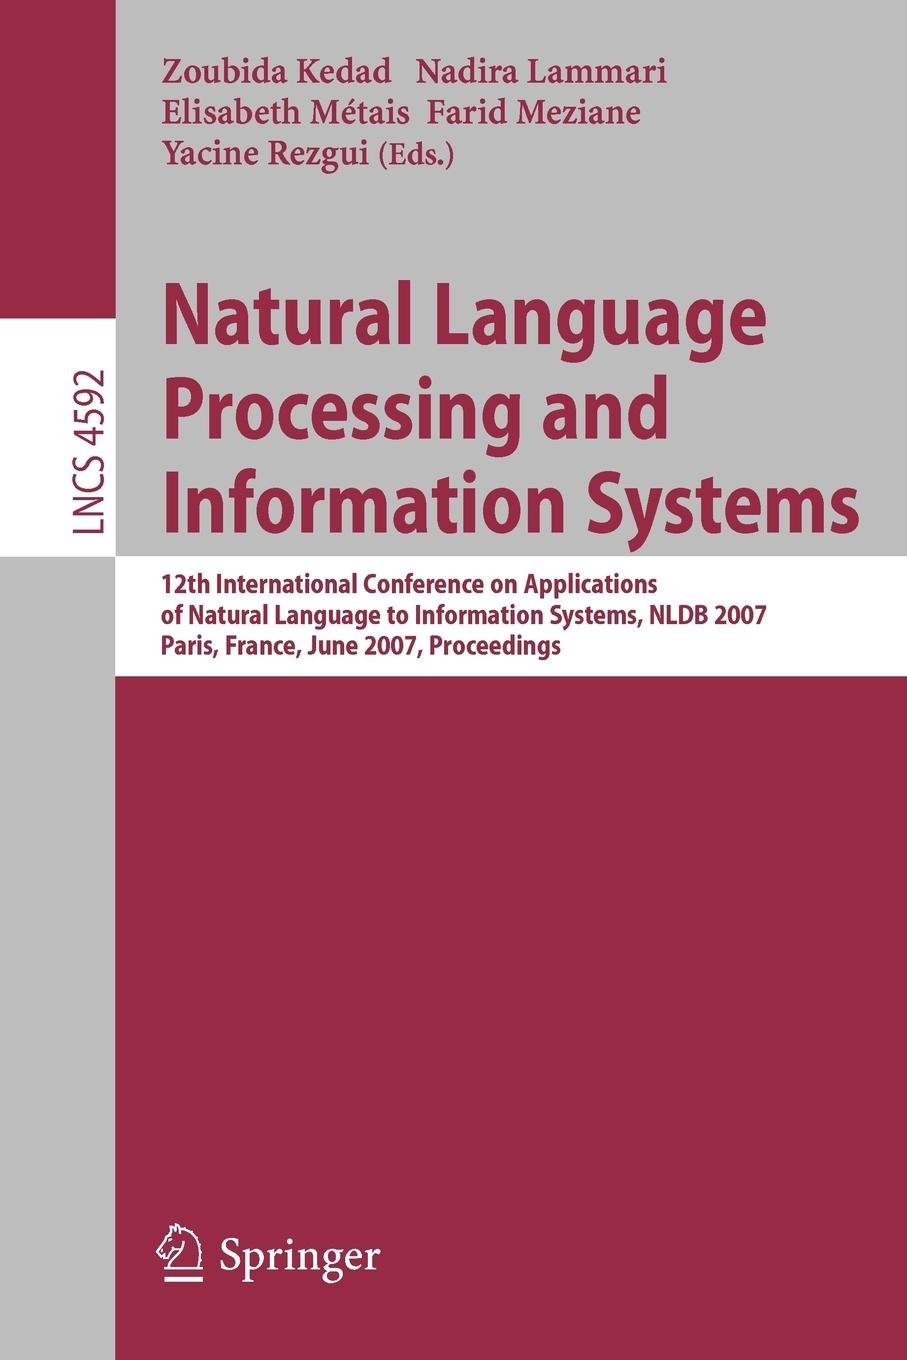 Natural Language Processing and Information Systems: 12th International Conference on Applications of Natural Language to Information Systems, NLDB 2007, Paris, France, June 27-29, 2007, Proceedings